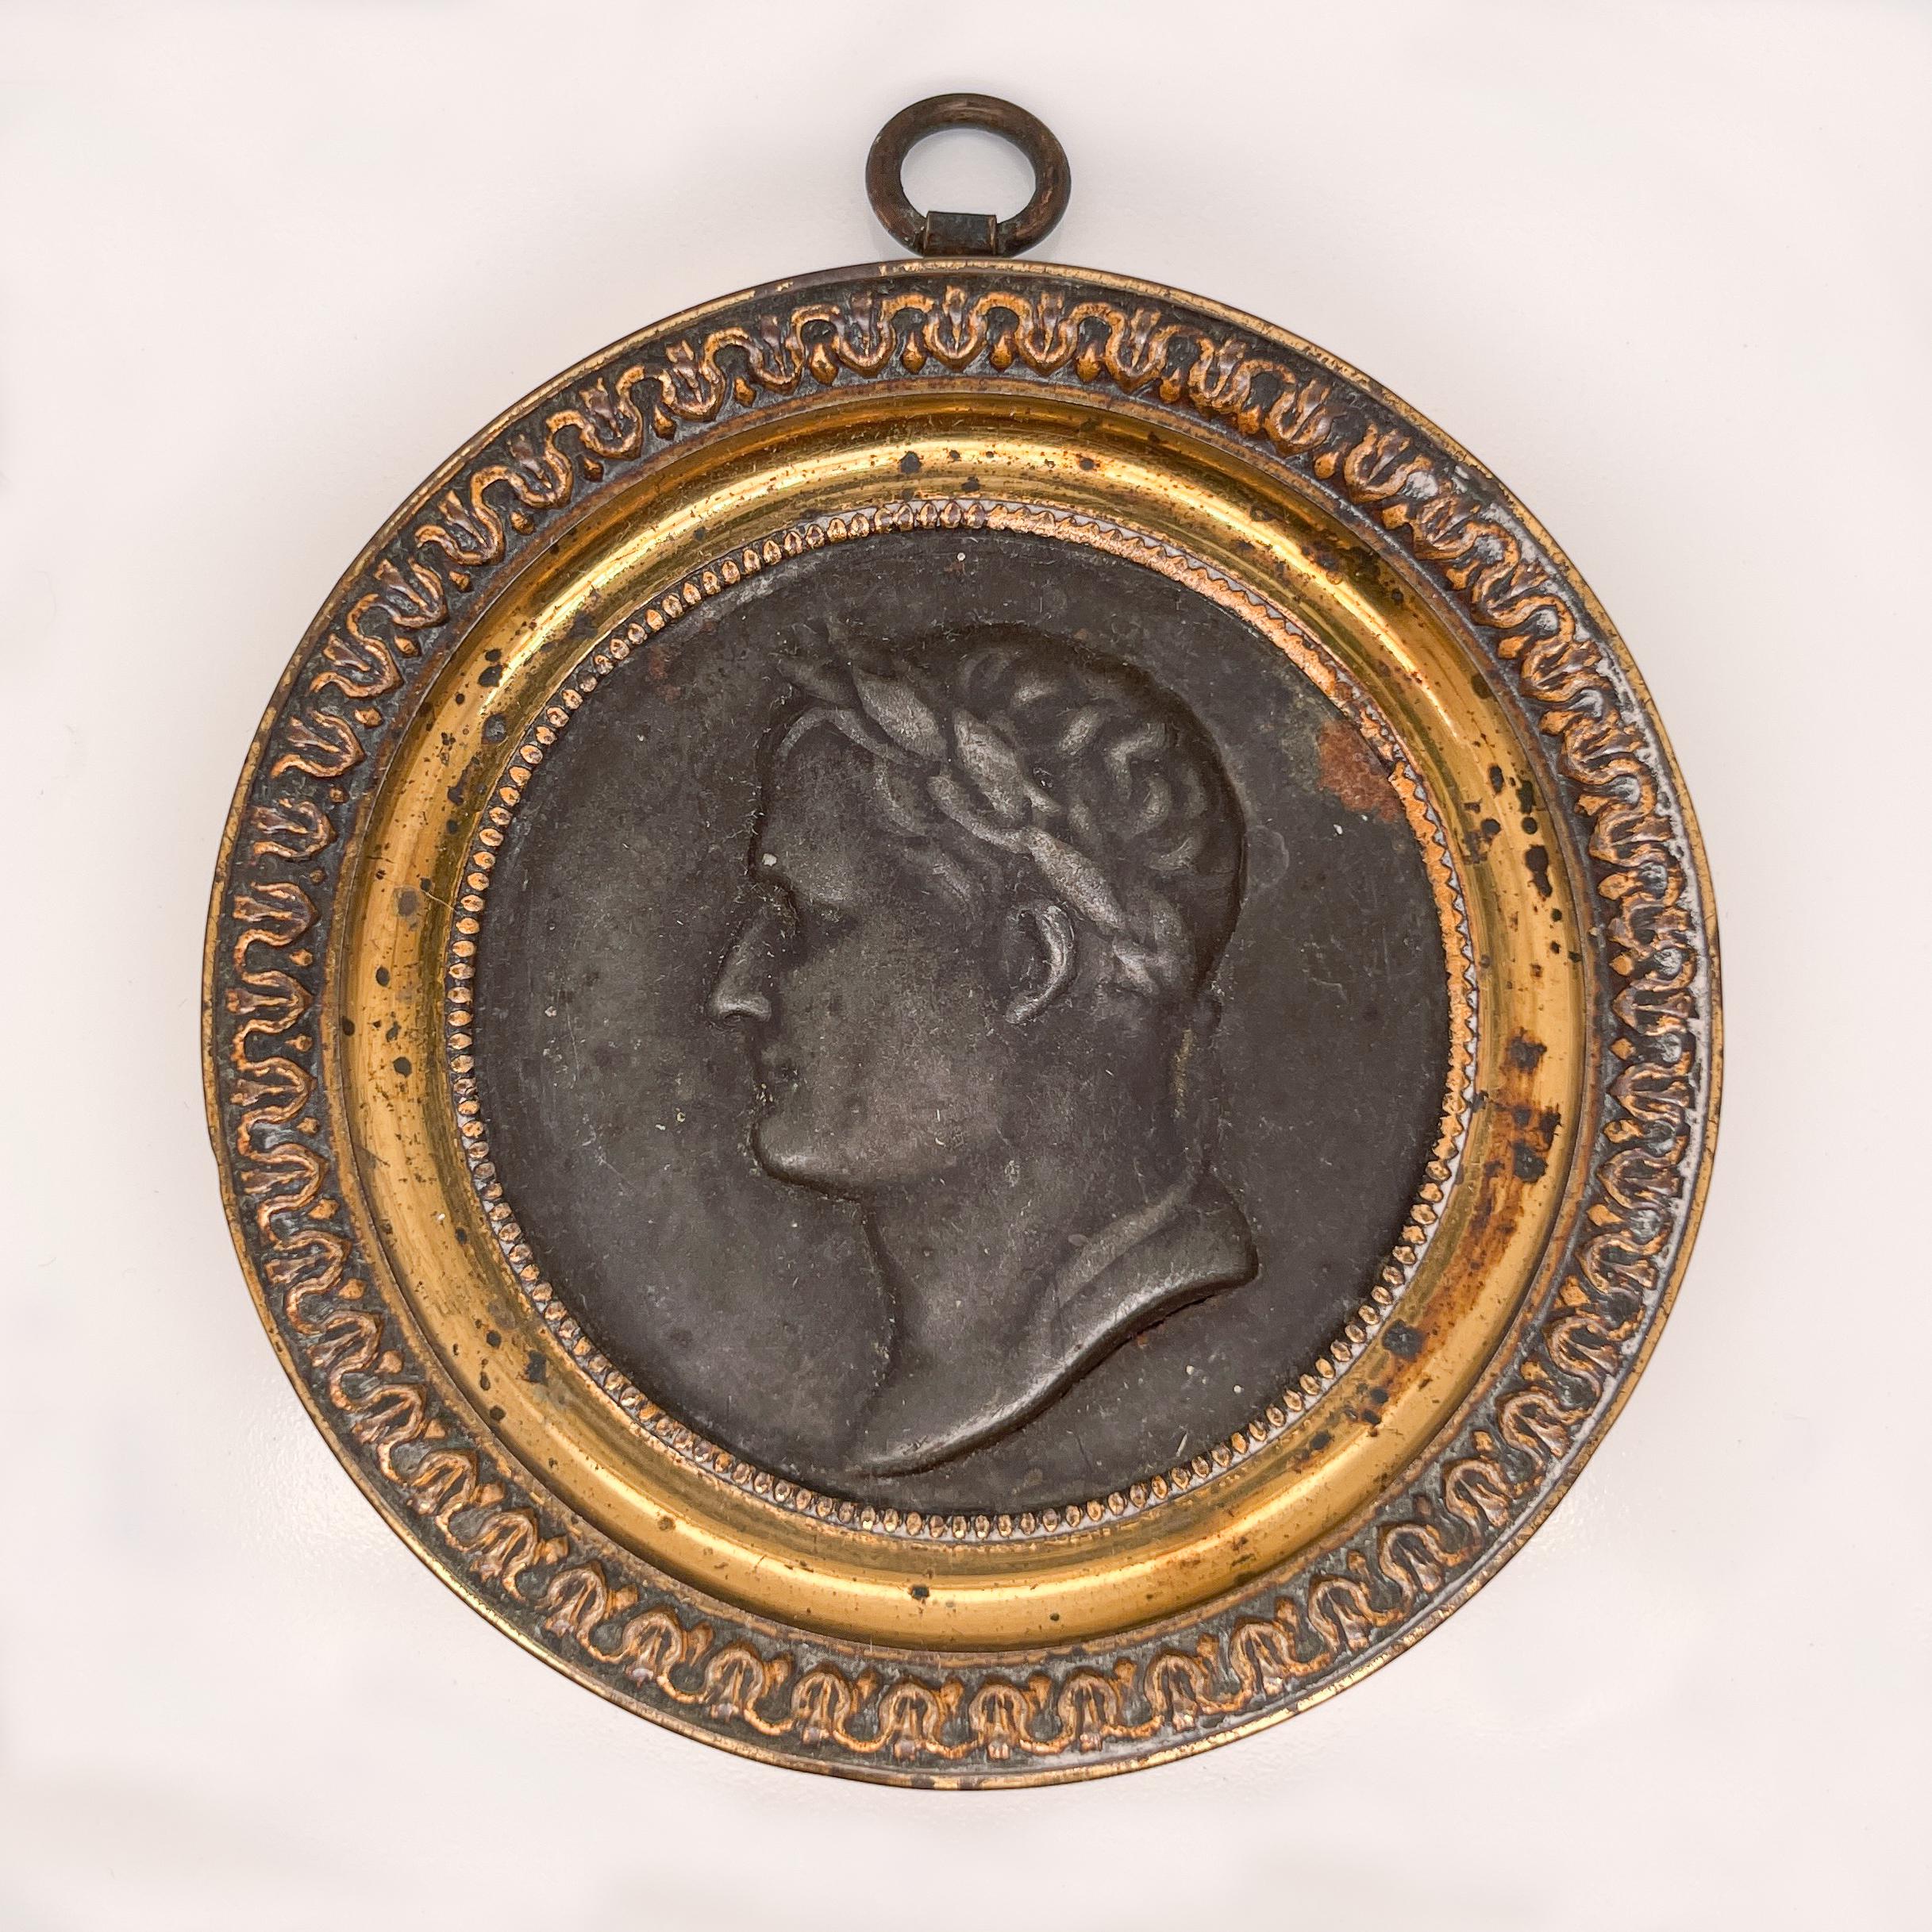 A fine antique French Napleonic rondel.

With an image of Napoleon as Caesar.

The stamped tin rondel is mounted in a thin gilt bronze or brass frame. 

With an integral loop to the top for hanging. 

Simply a fine Napoleon II period